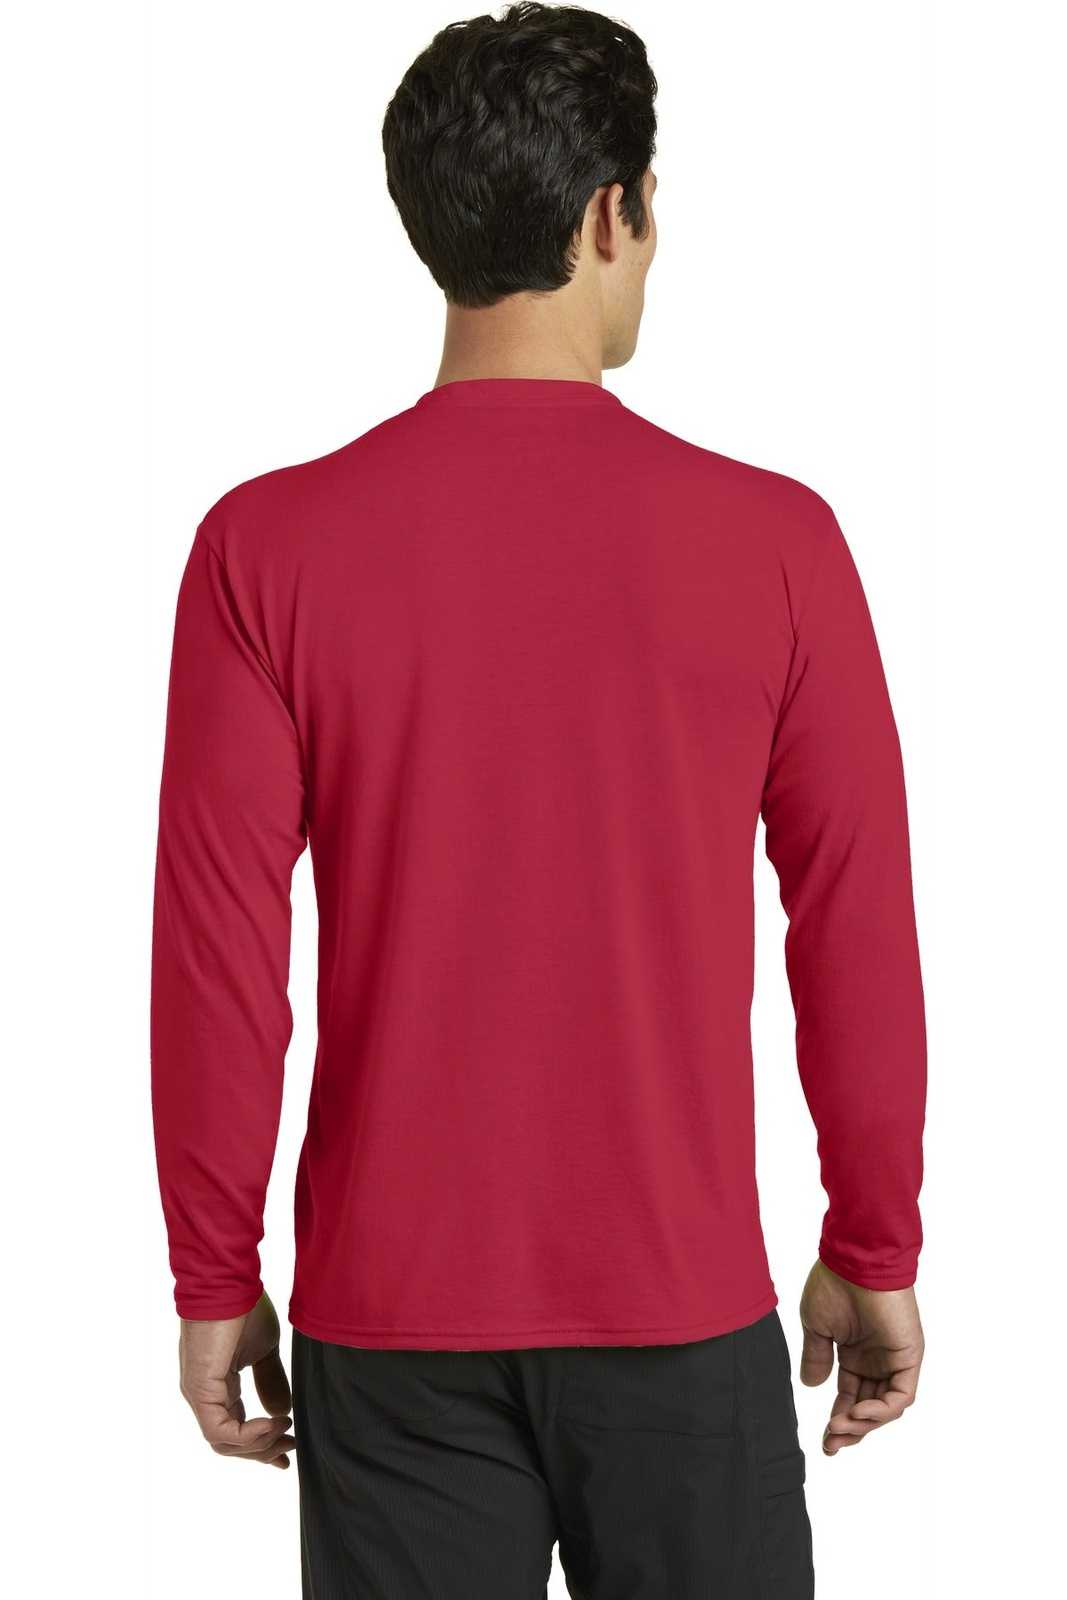 Port & Company PC381LS Long Sleeve Performance Blend Tee - Red - HIT a Double - 1